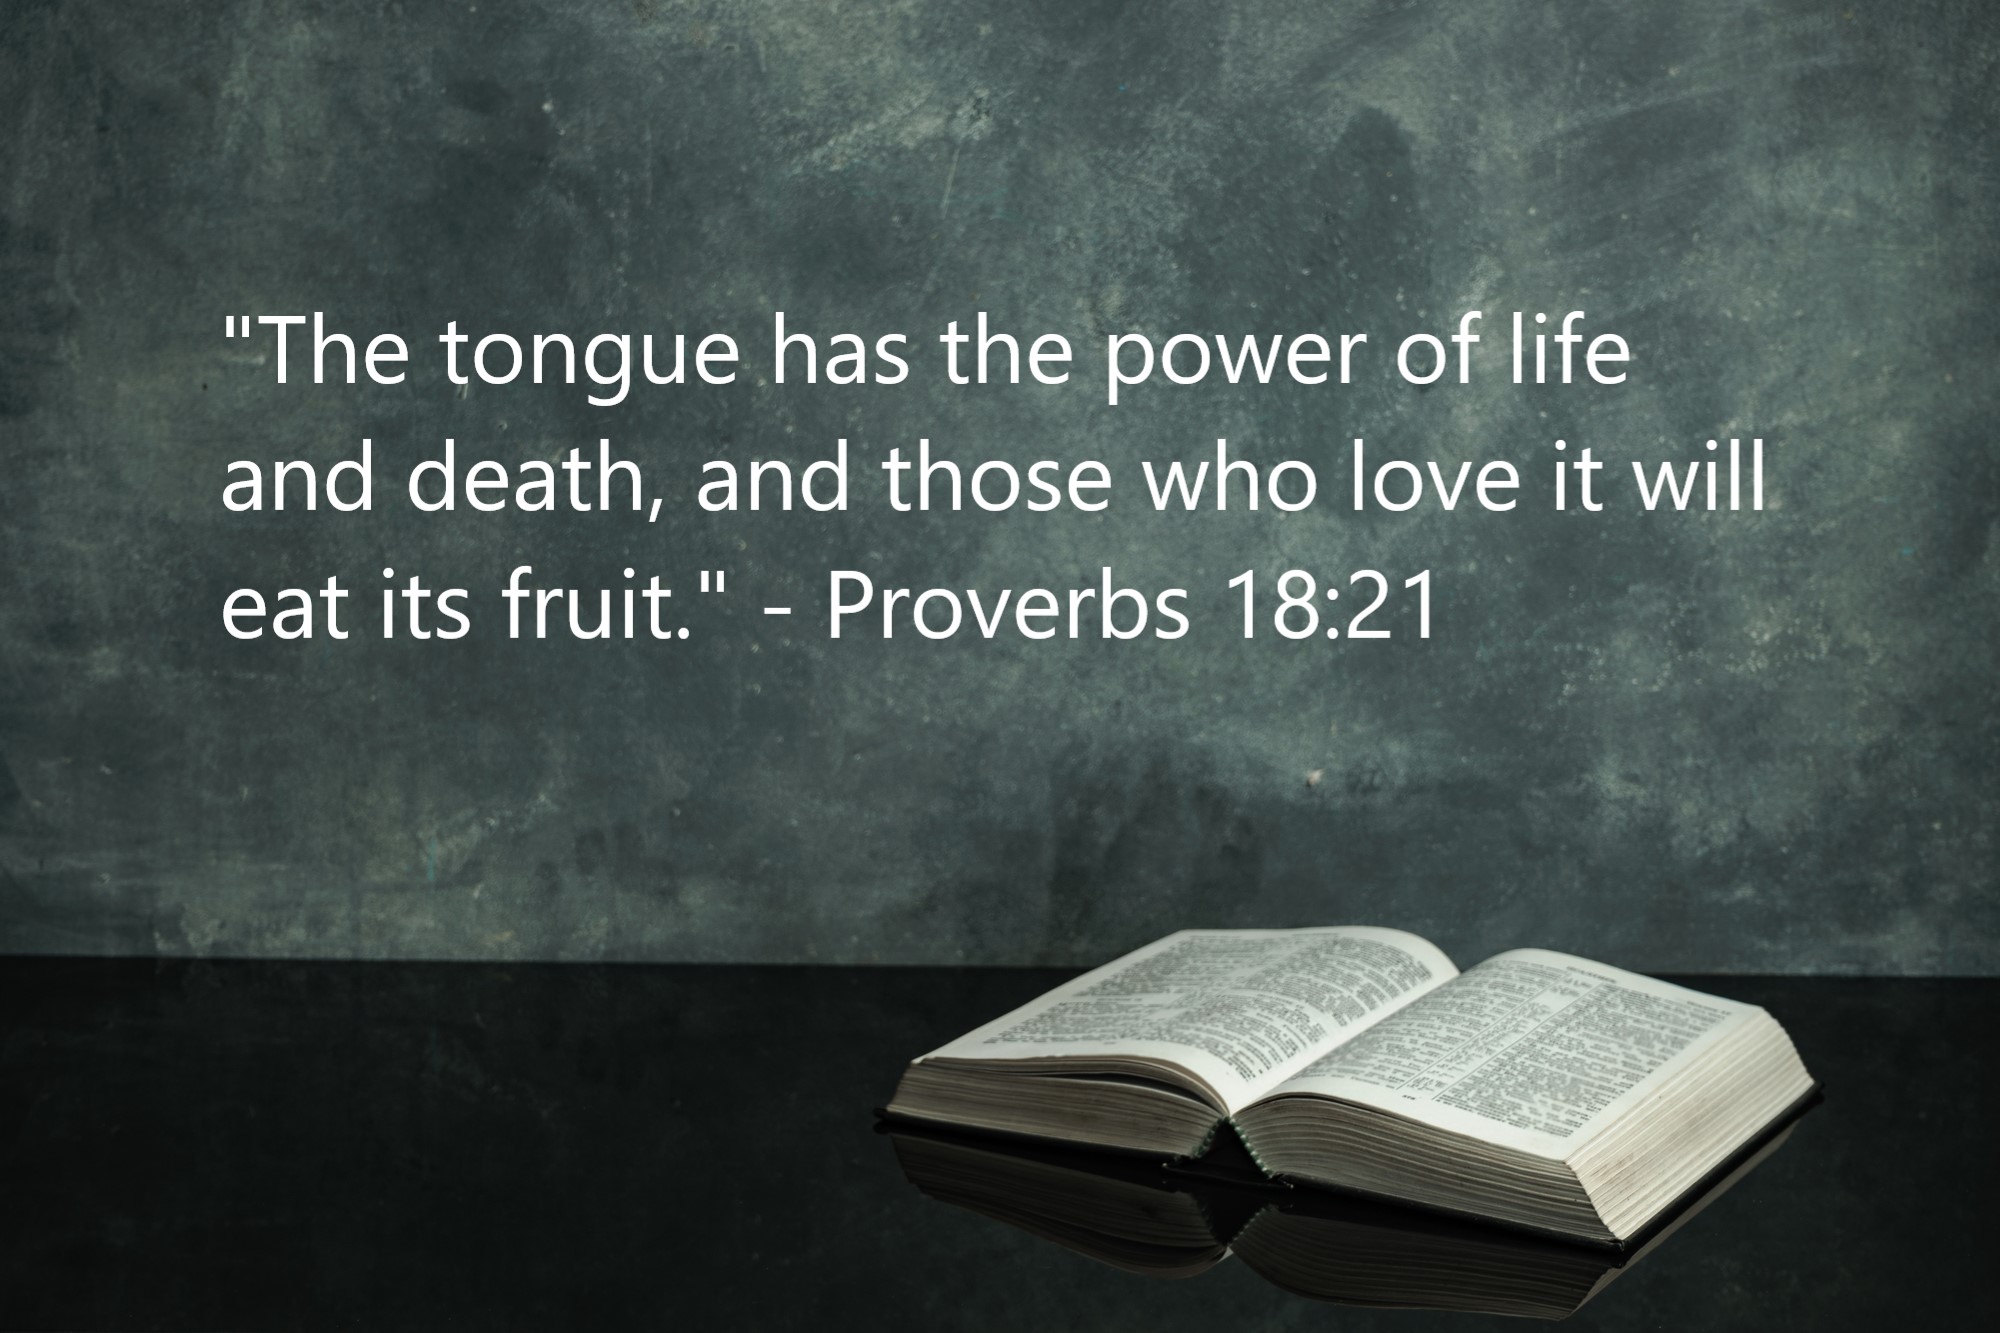 "The tongue has the power of life and death, and those who love it will eat its fruit." - Proverbs 18:21